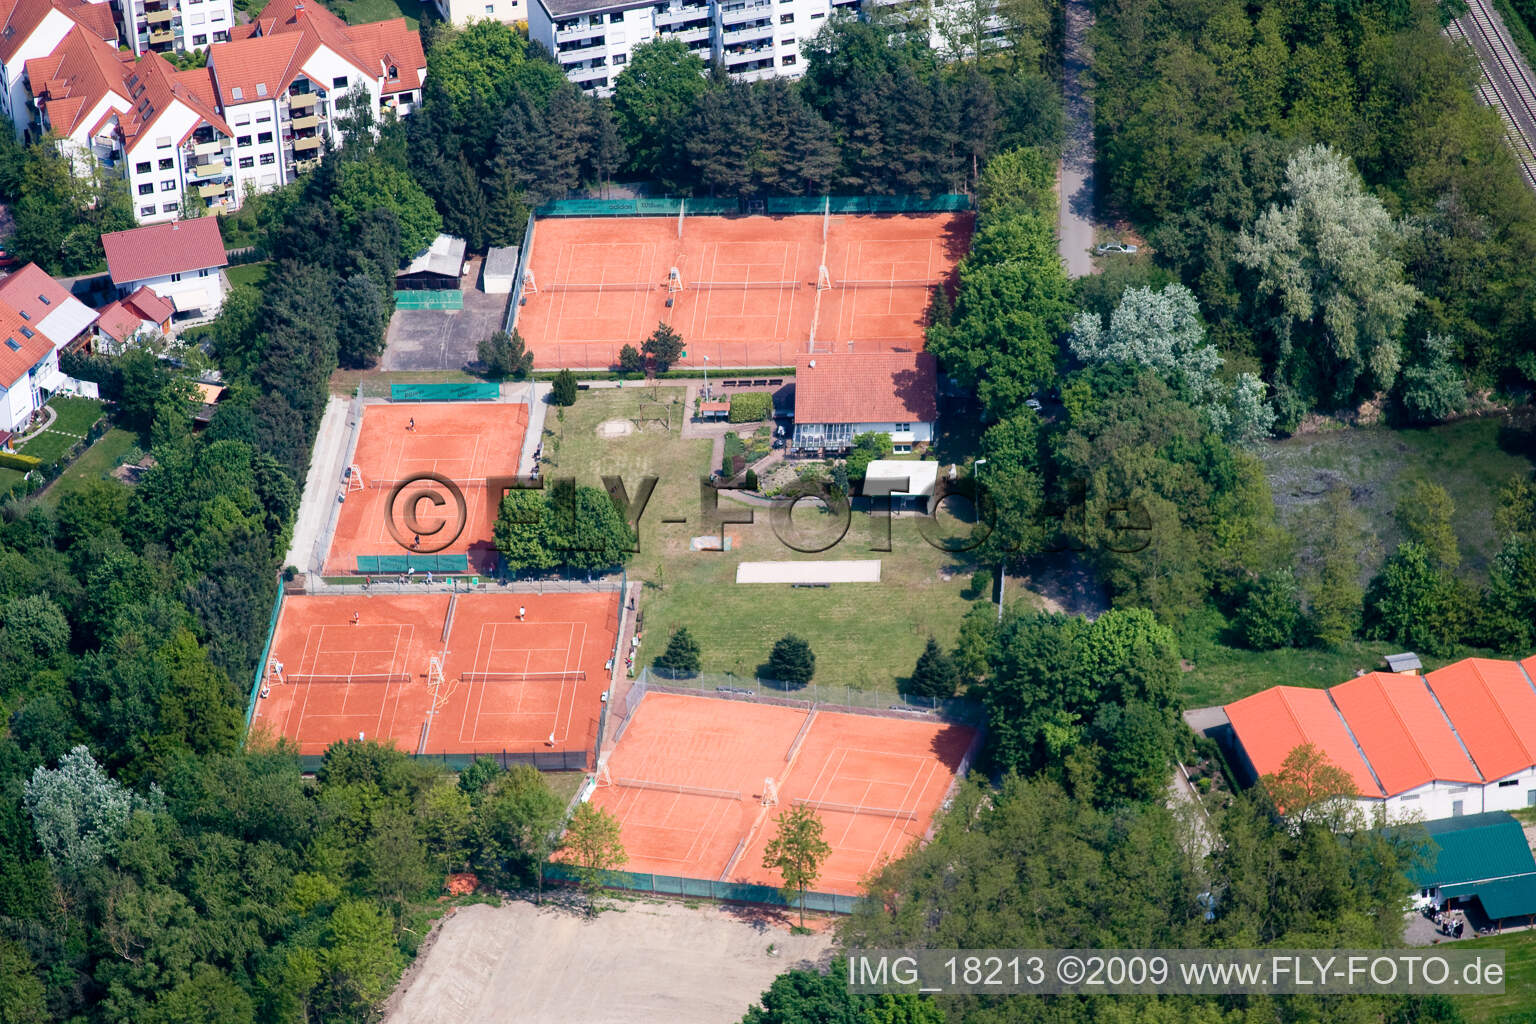 Aerial view of Tennis courts in Jockgrim in the state Rhineland-Palatinate, Germany